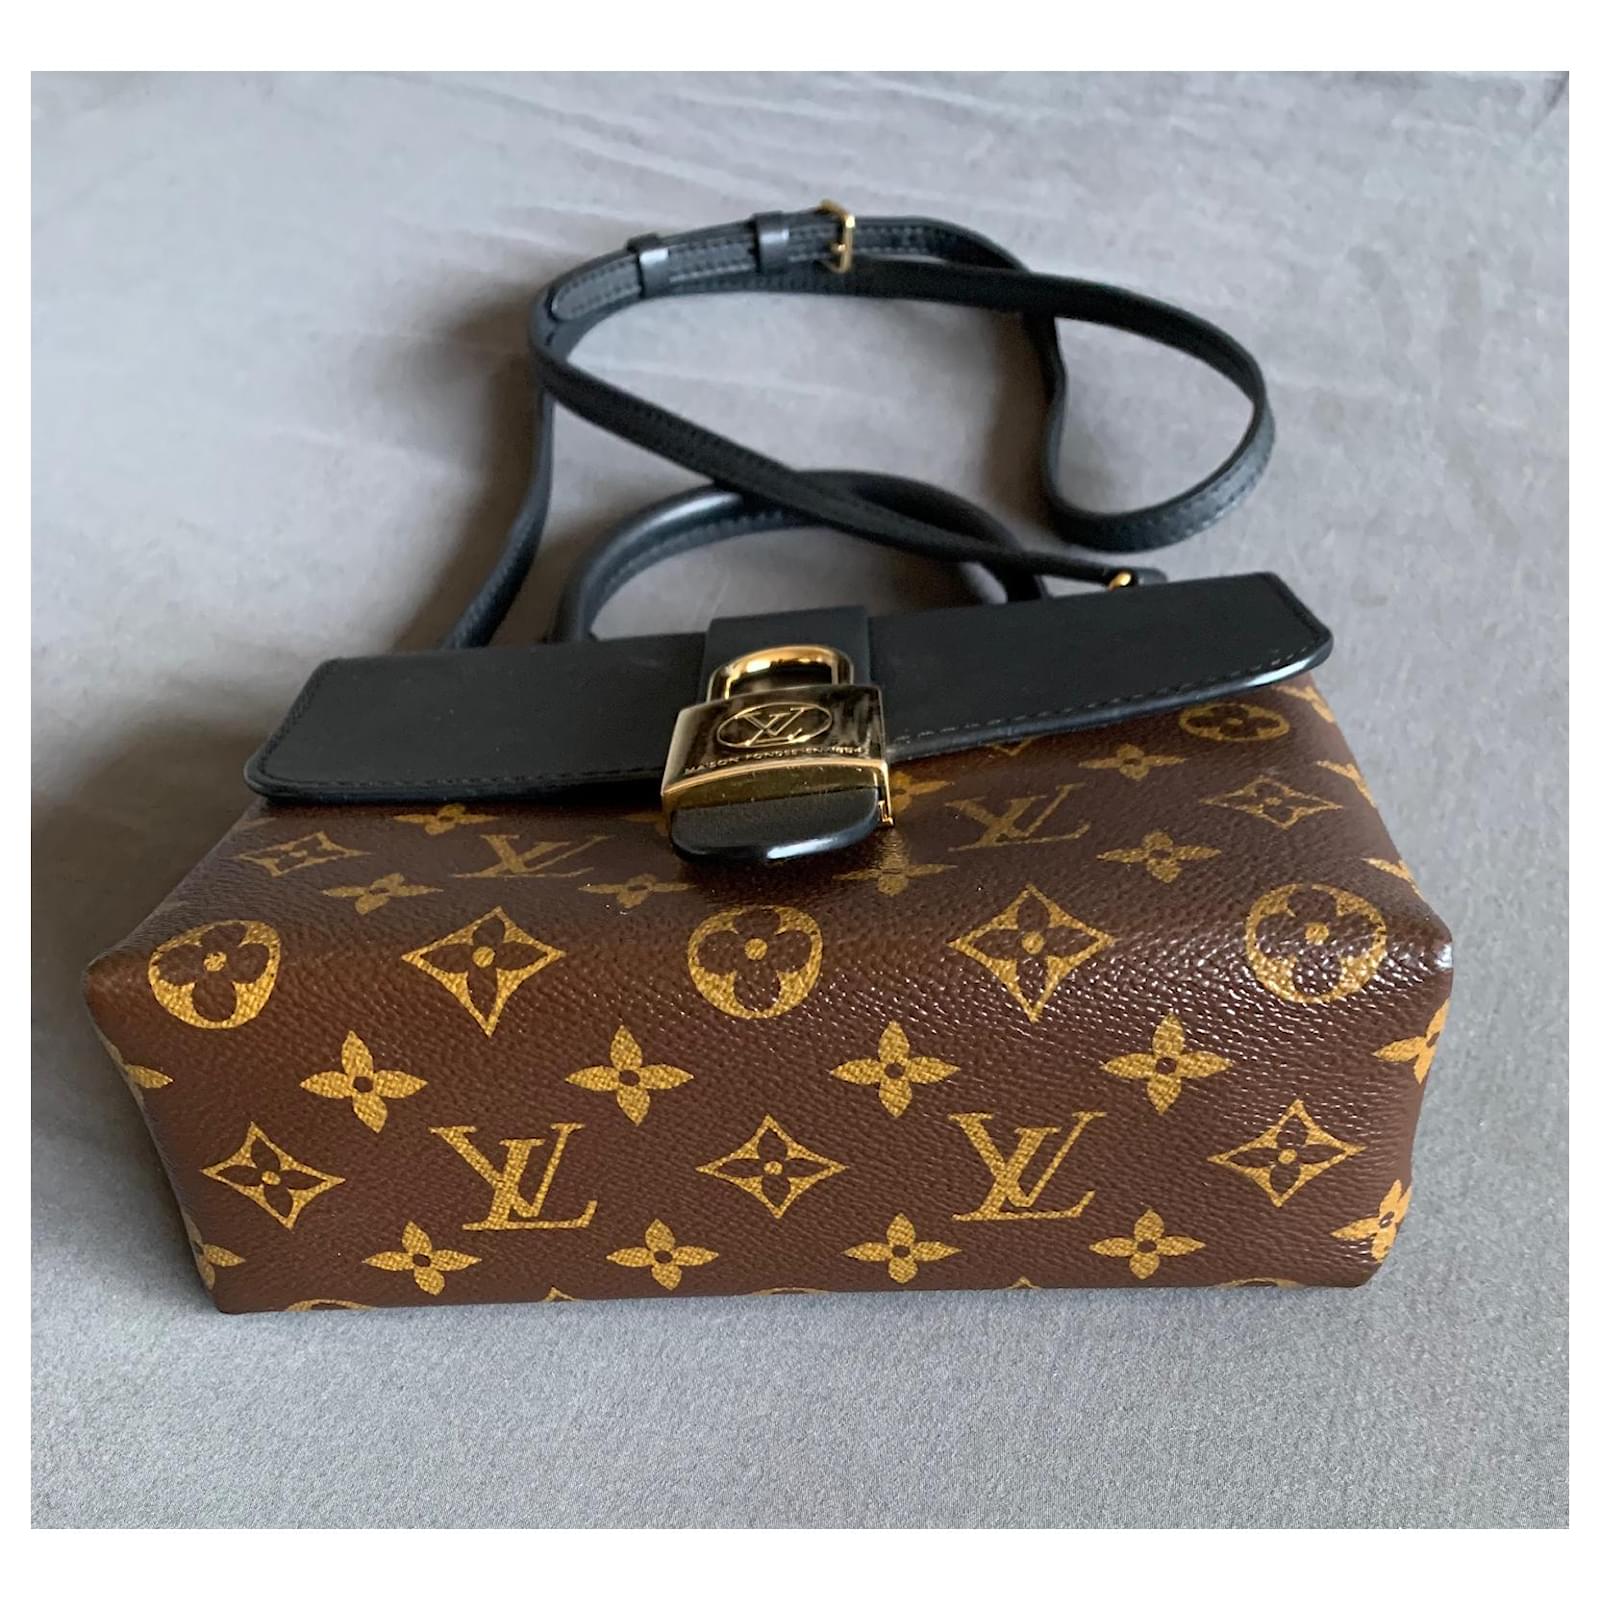 myluxurydesignerbranded - Excellent Like New Authentic Louis Vuitton Locky  Bb Bag with Strap, Dust Bag, Box & Receipt RM6,xxx only!